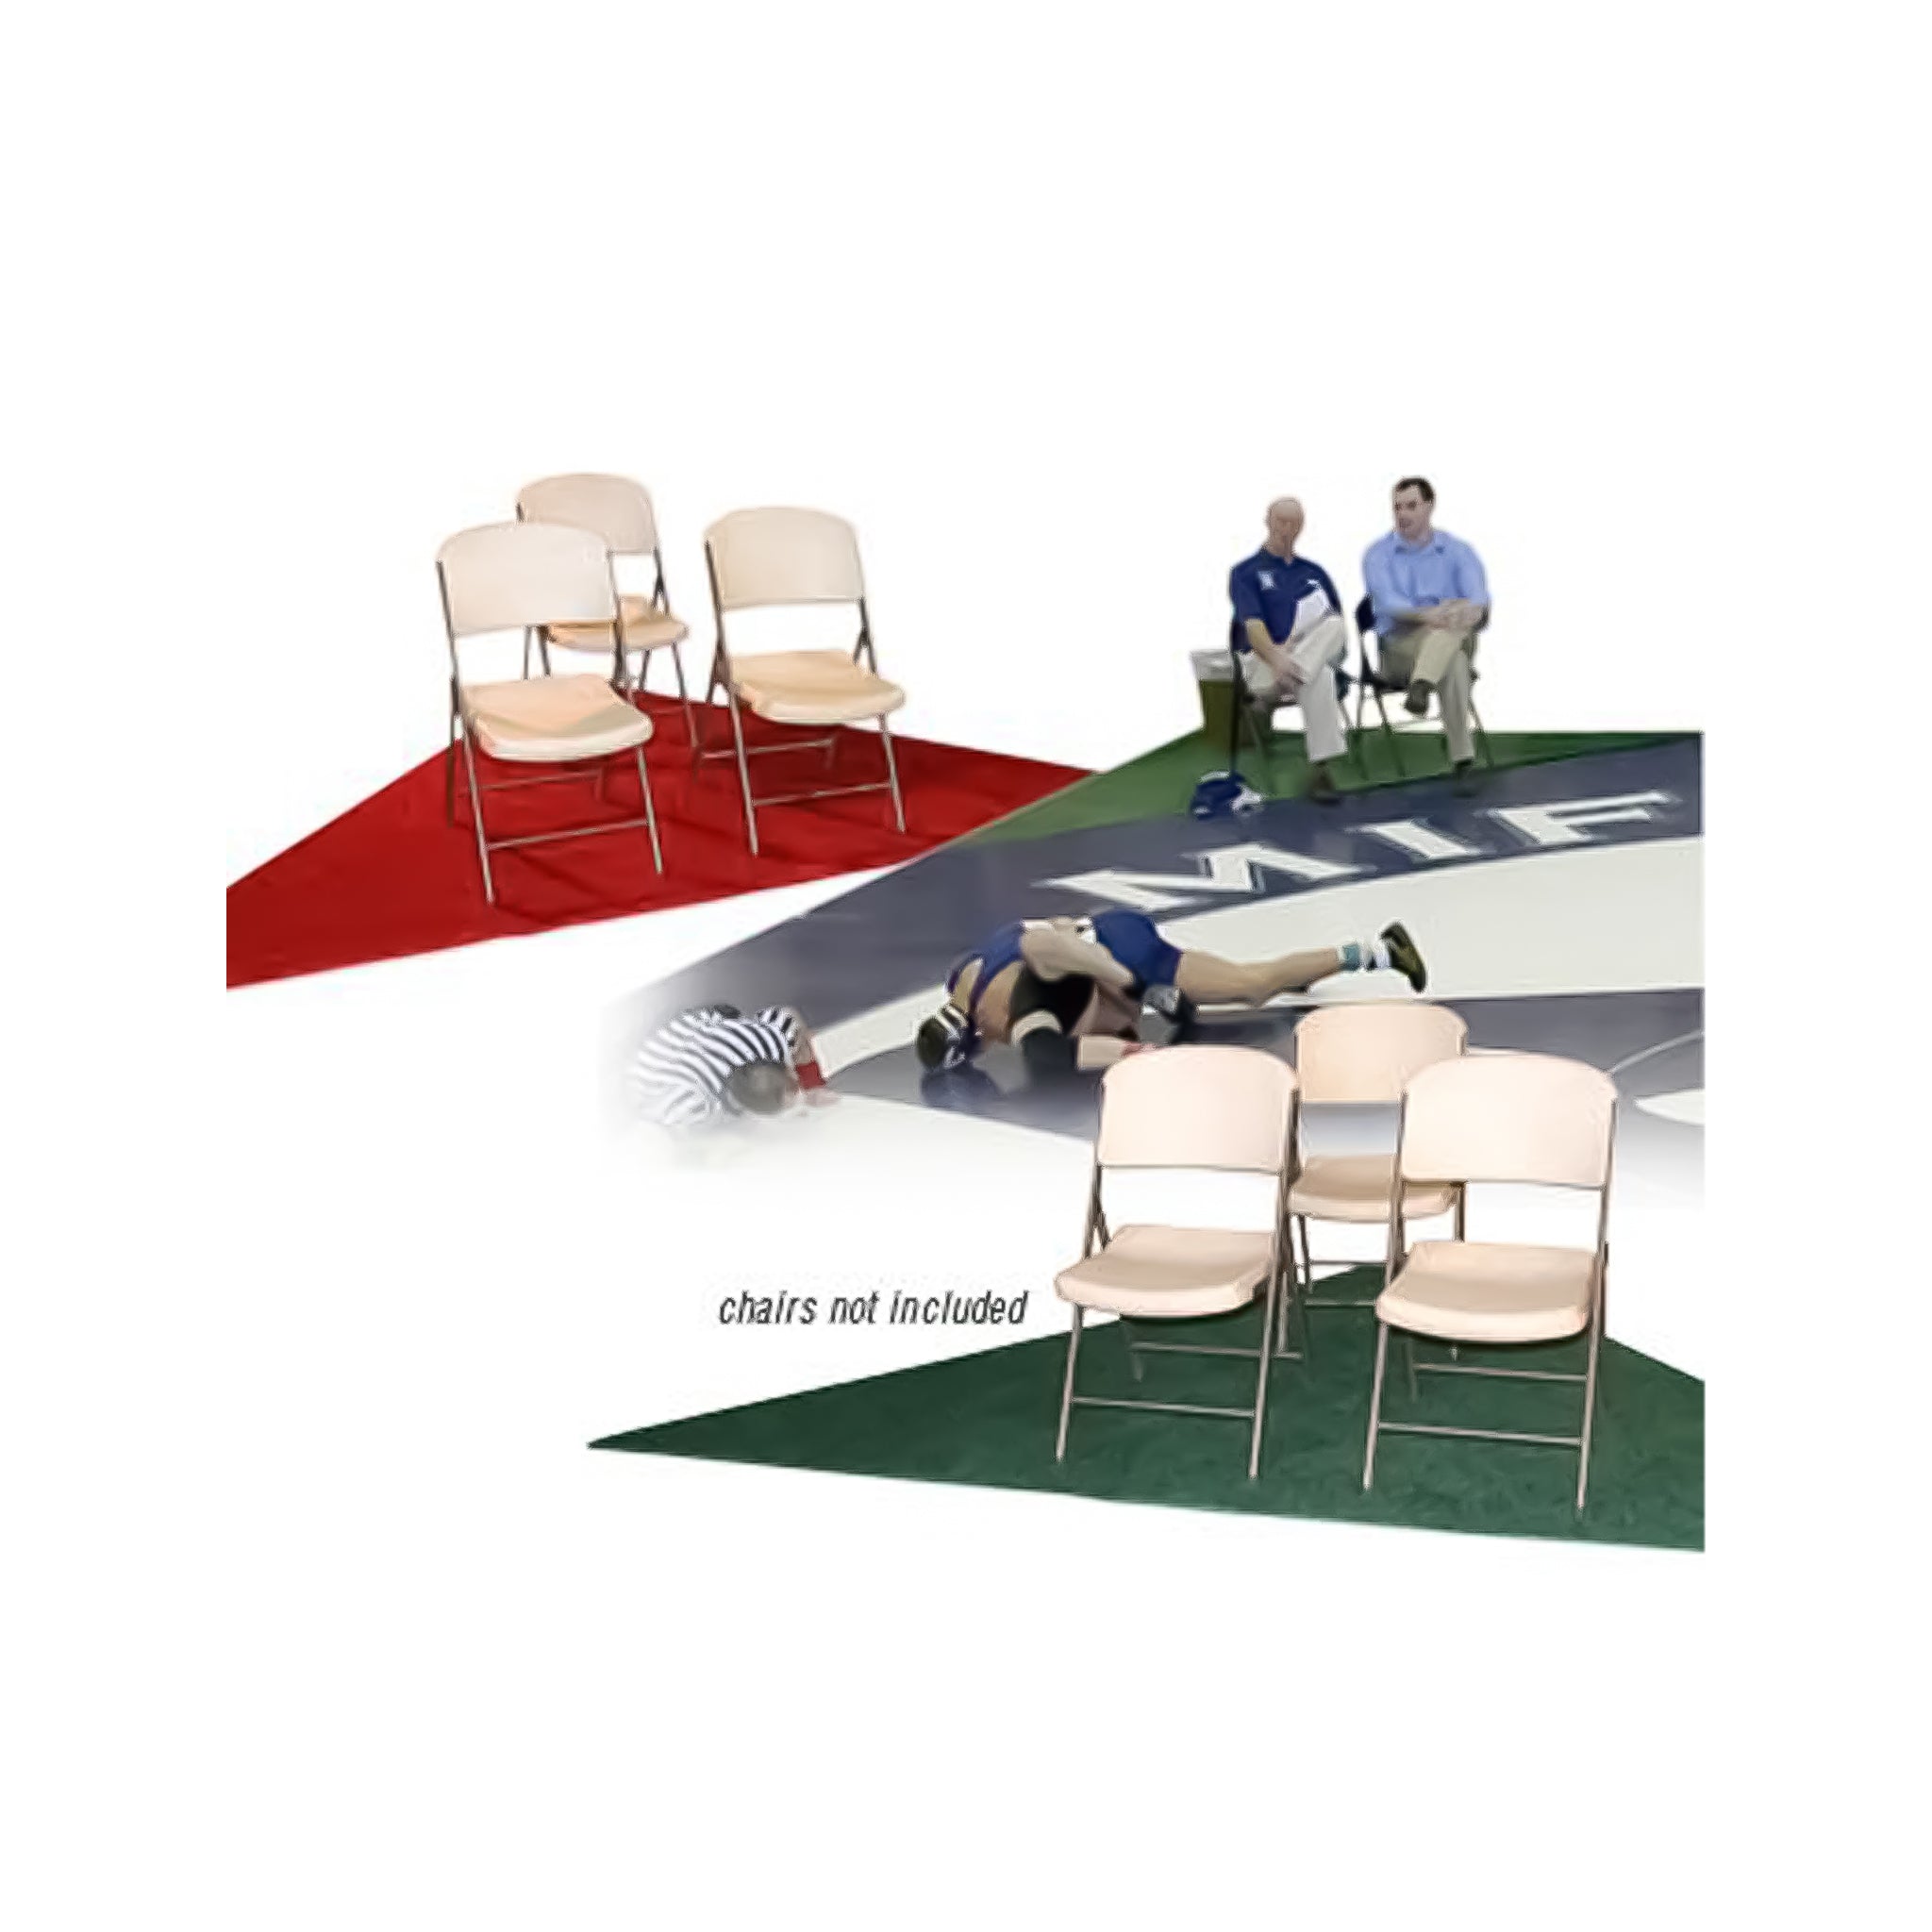 Carpet Corners - Protecting Wrestling Mats from Chair Impressions